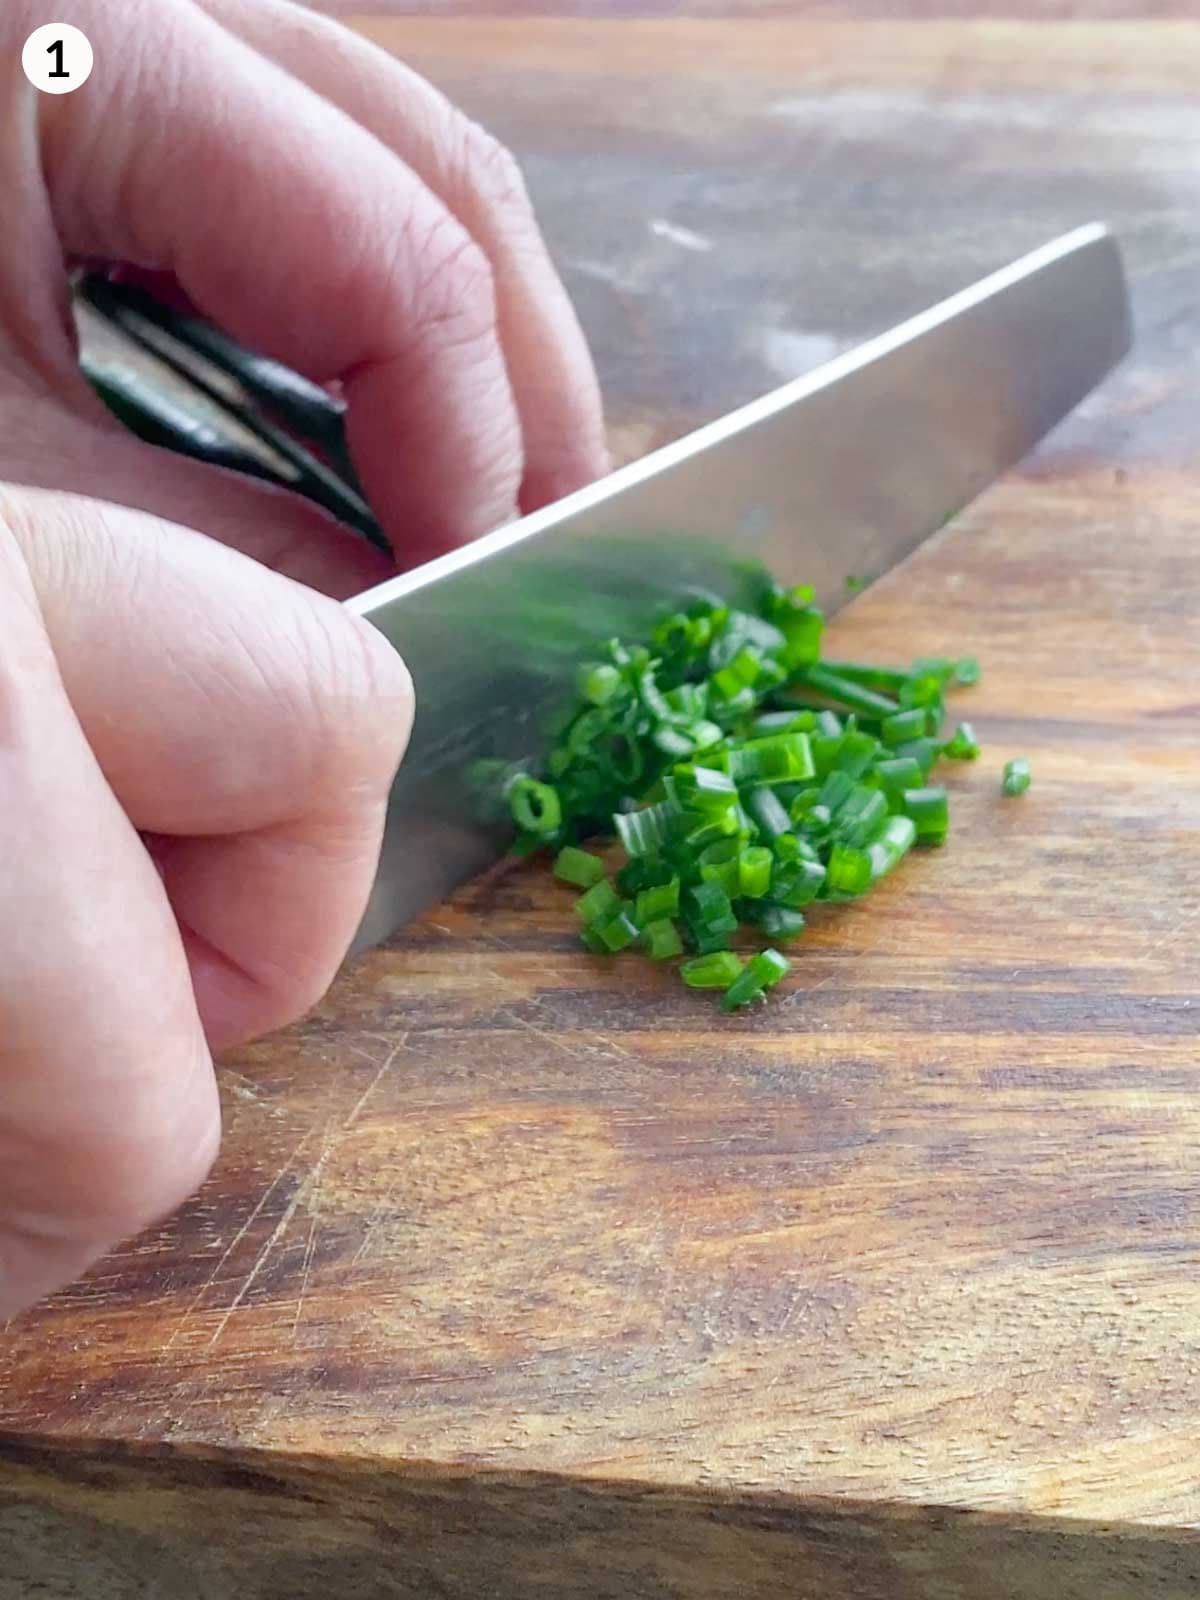 Knife chopping chives on a wooden board